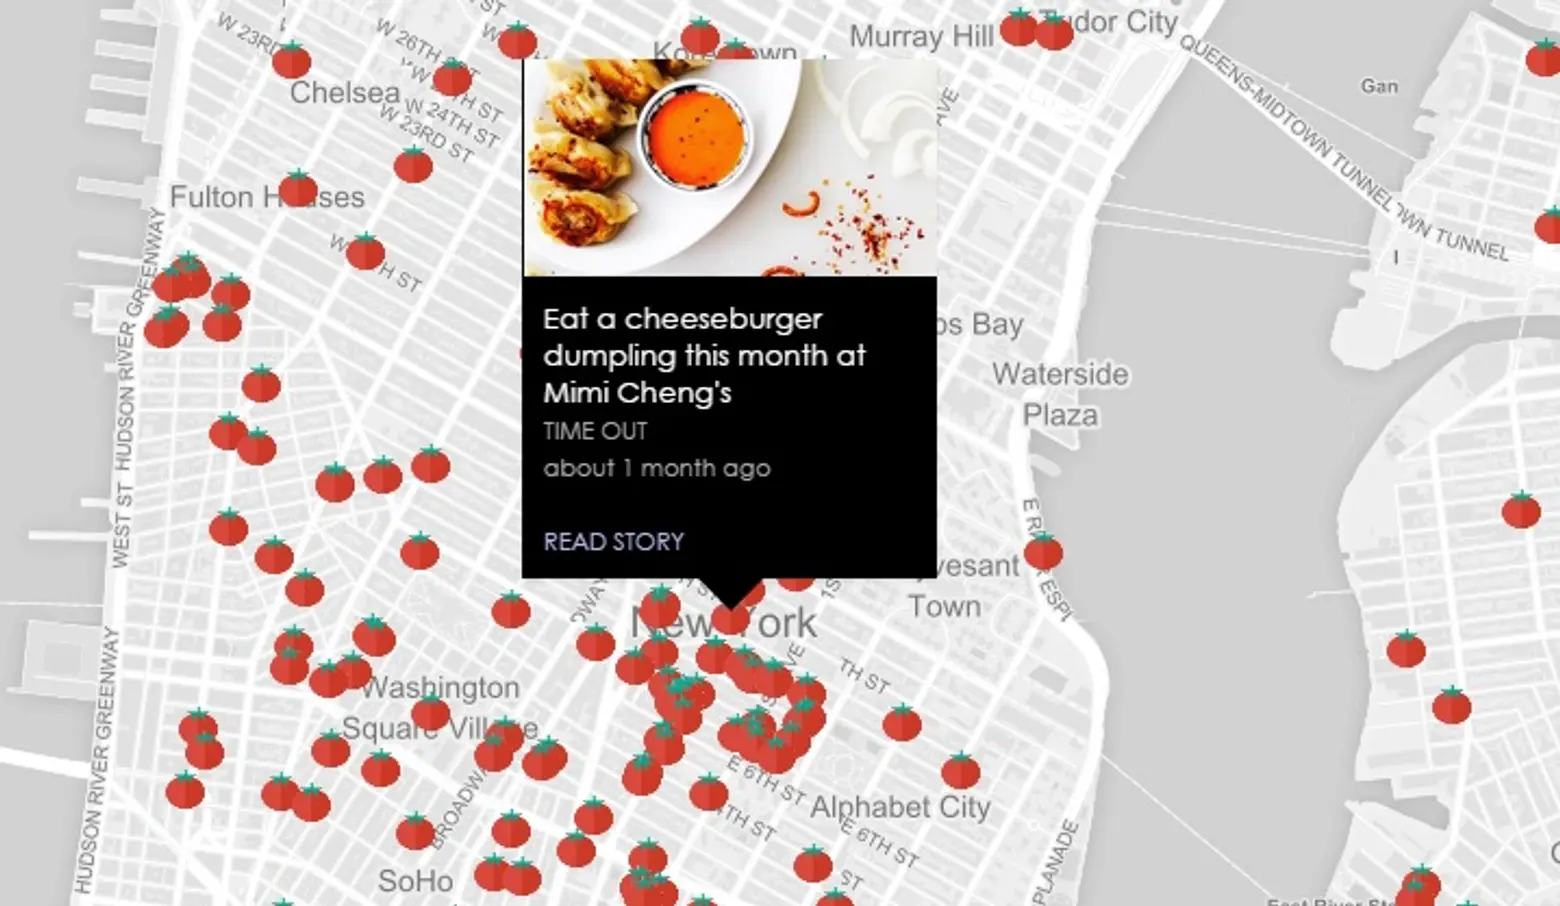 Get All Your Local Foodie News in This New Interactive Map